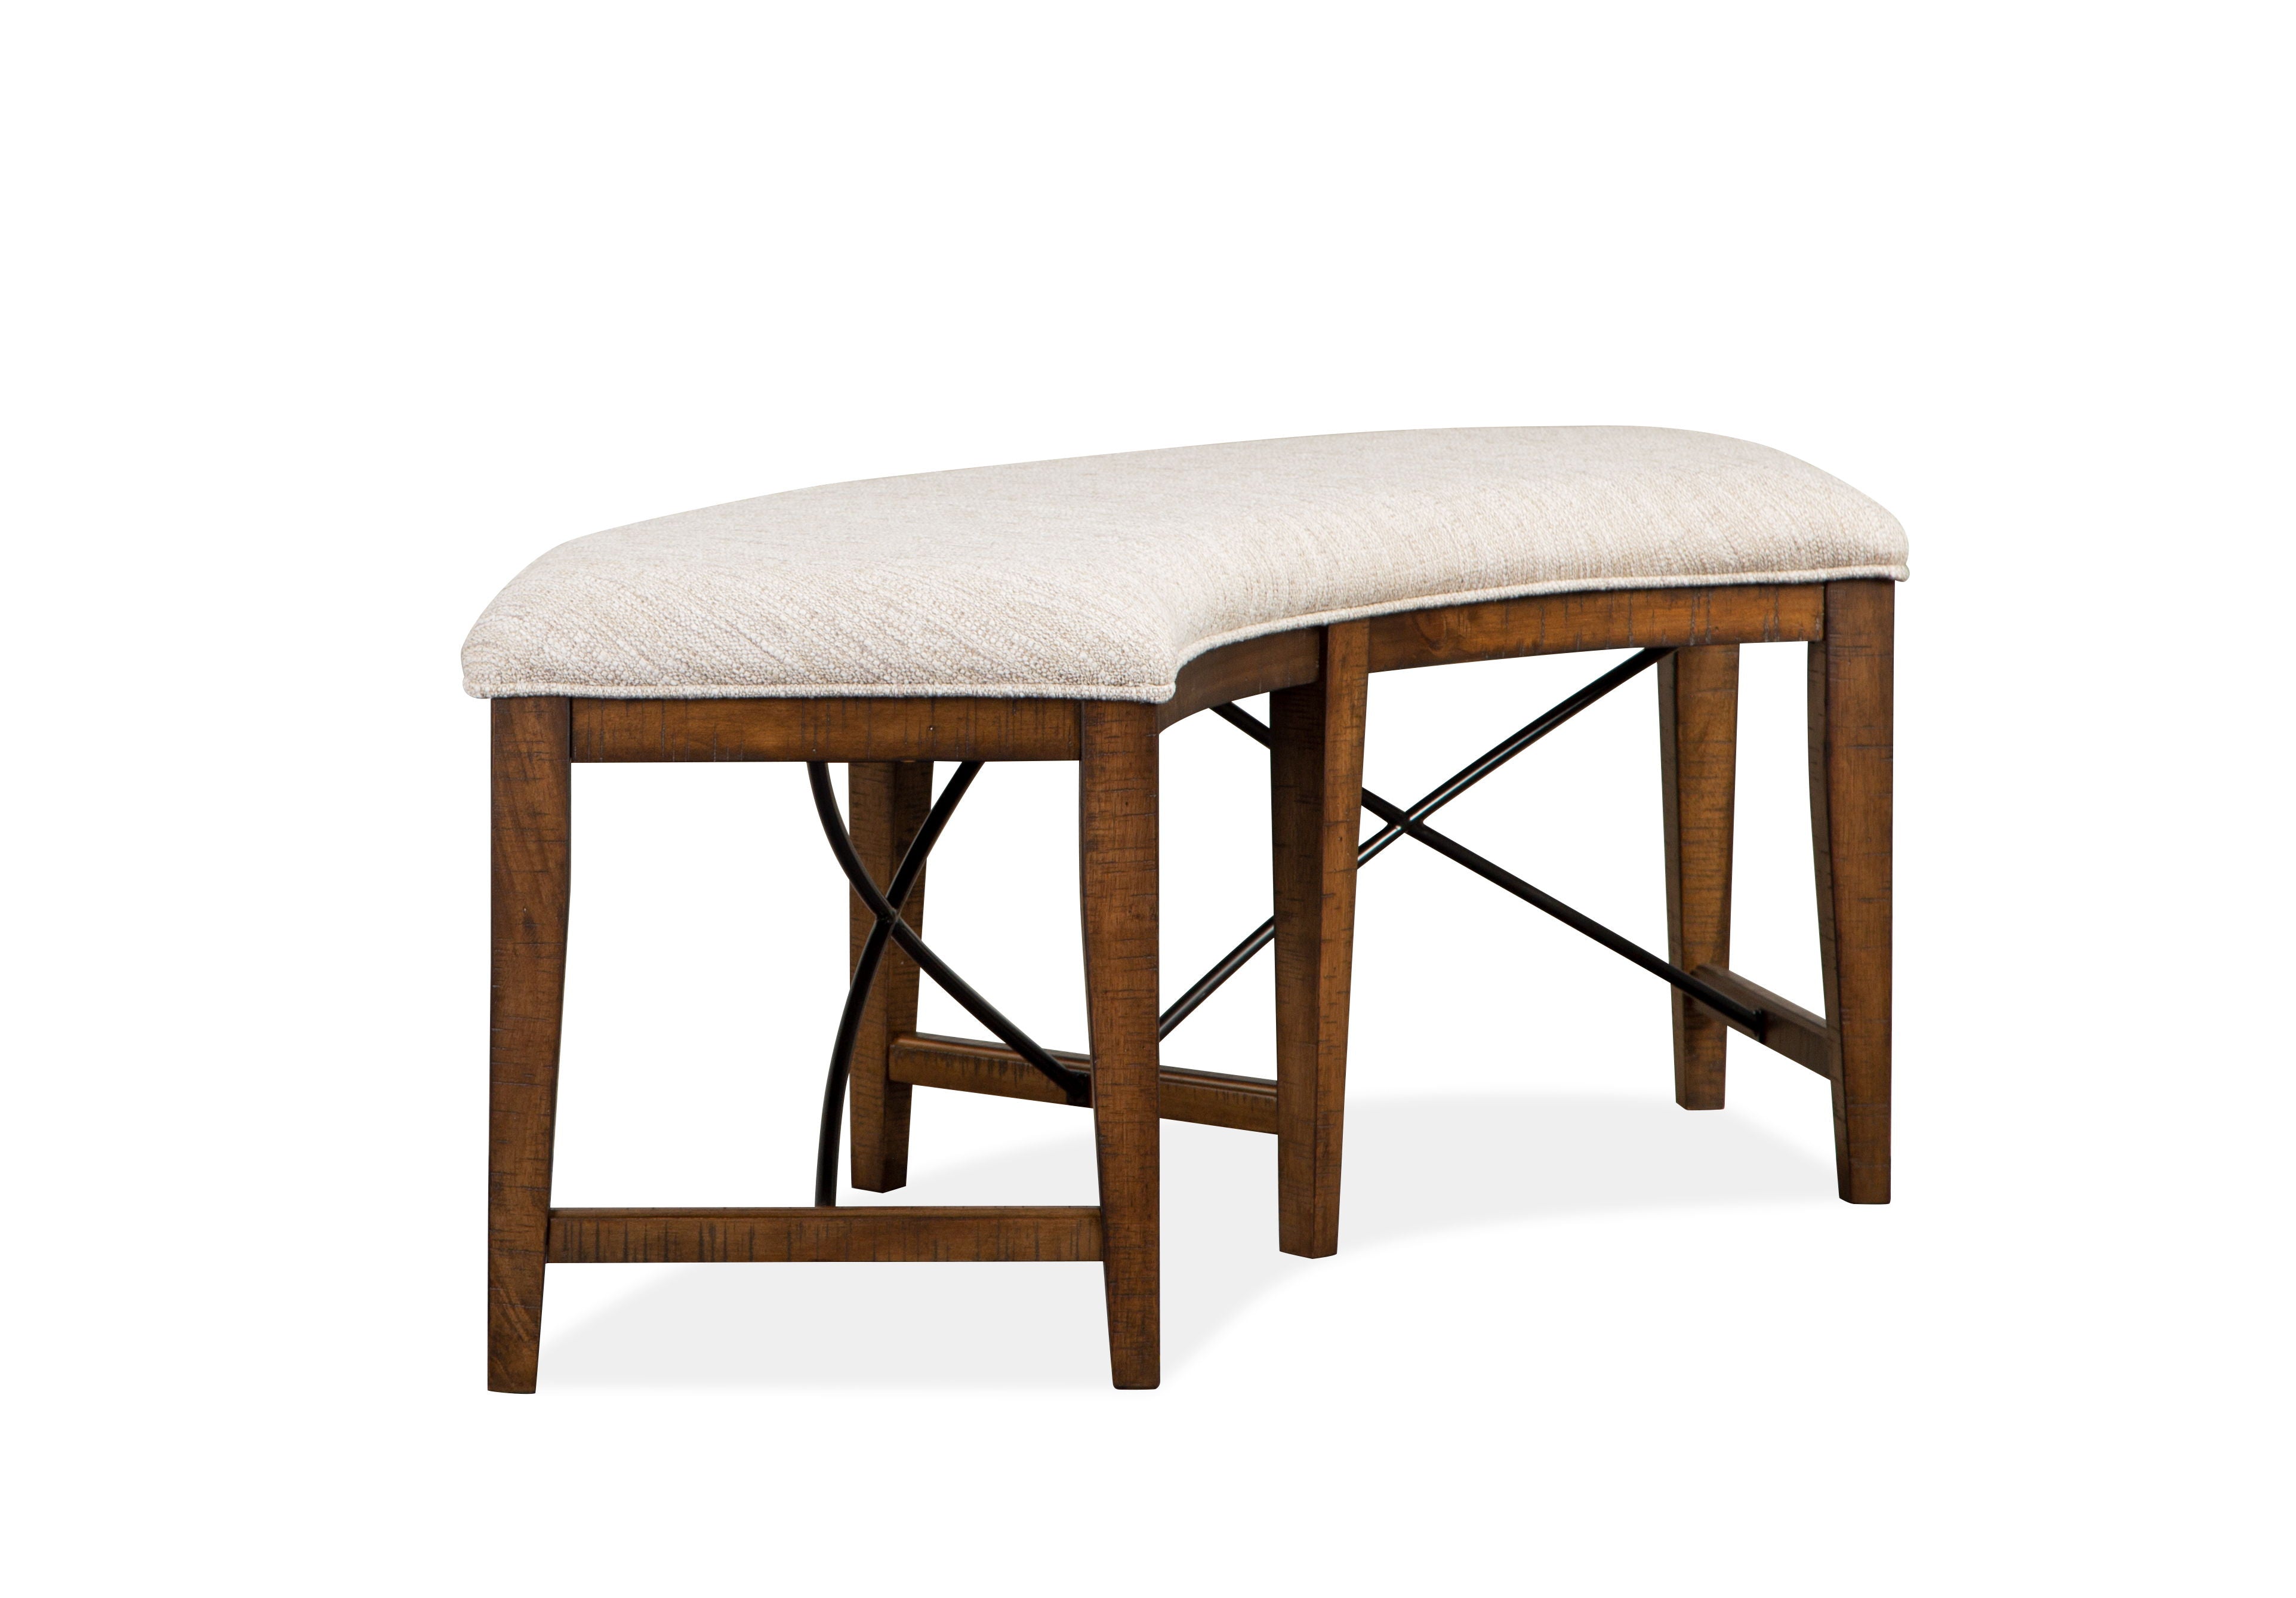 Bay Creek - Curved Bench With Upholstered Seat - Toasted Nutmeg